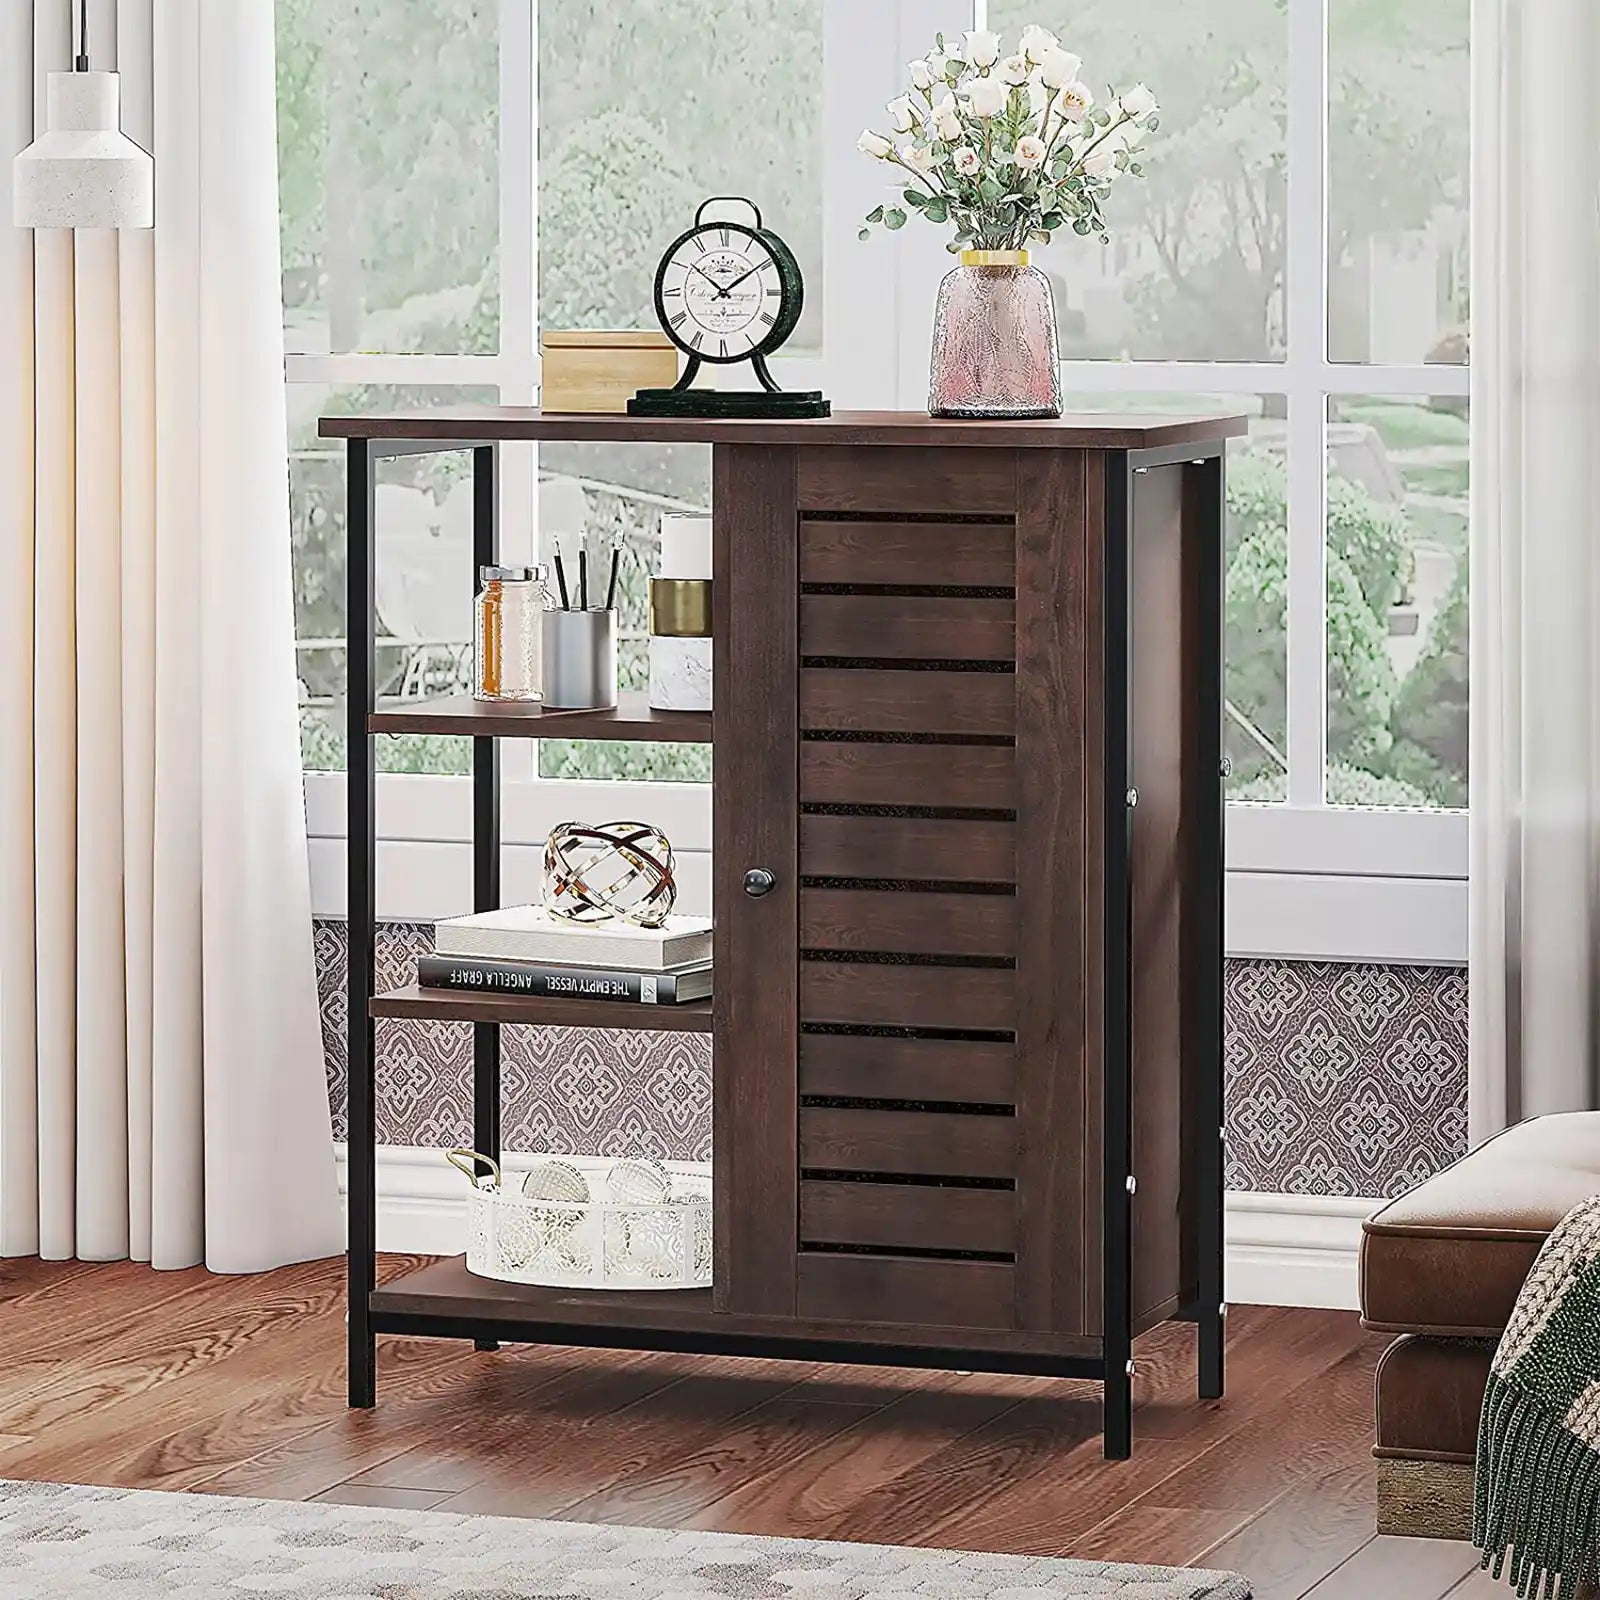 Wood Cabinet Wooden Display Bookcase